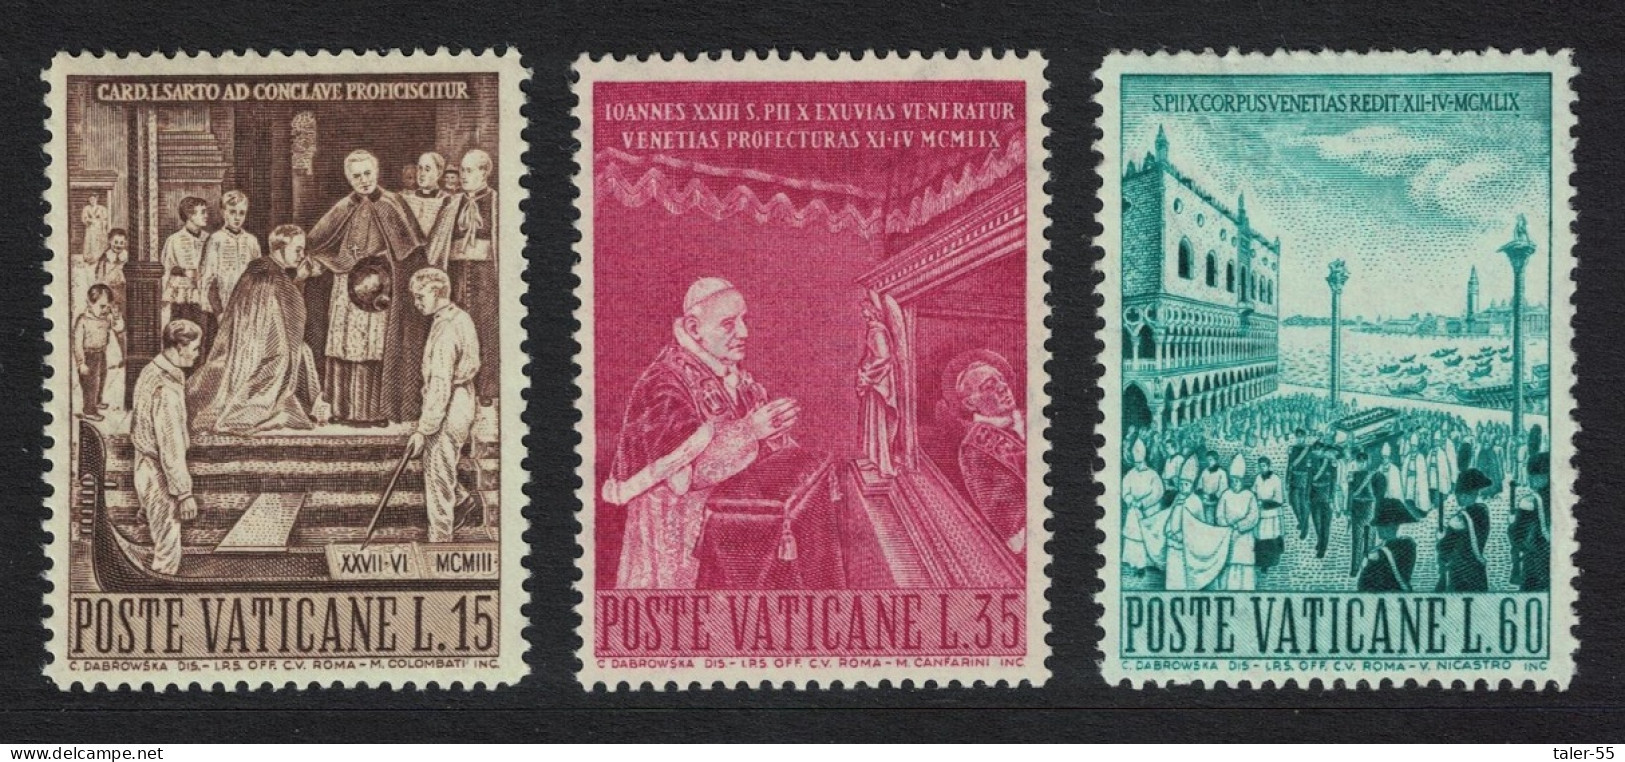 Vatican Transfer Of Relics Of Pope Pius X From Rome To Venice 3v 1960 MNH SG#323-325 Sc#281-283 - Ungebraucht